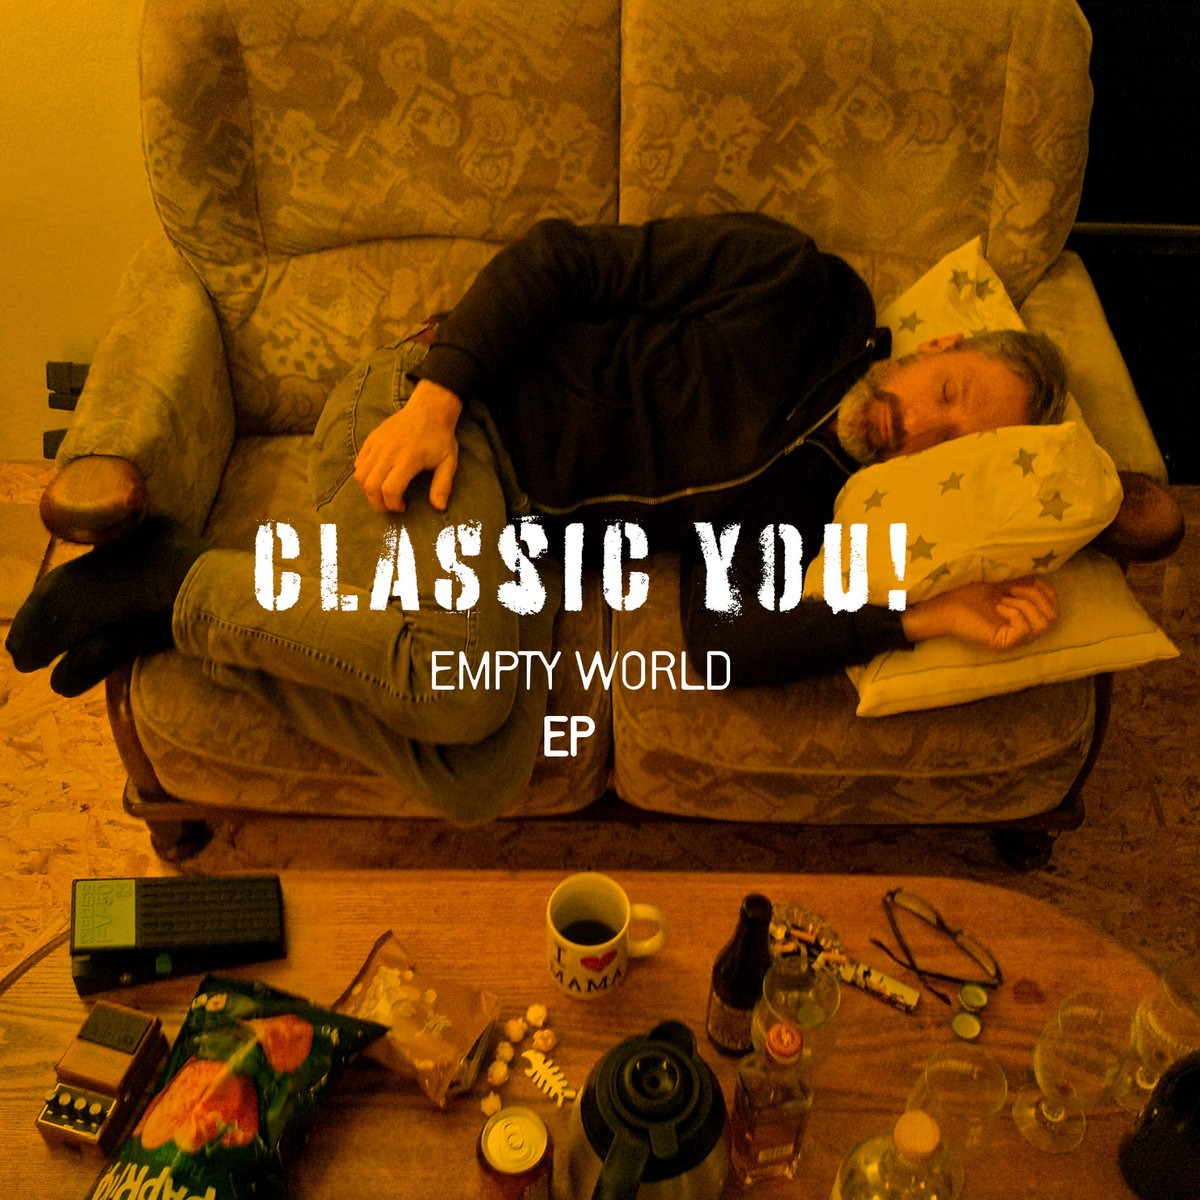 Classic you! - Empty world EP